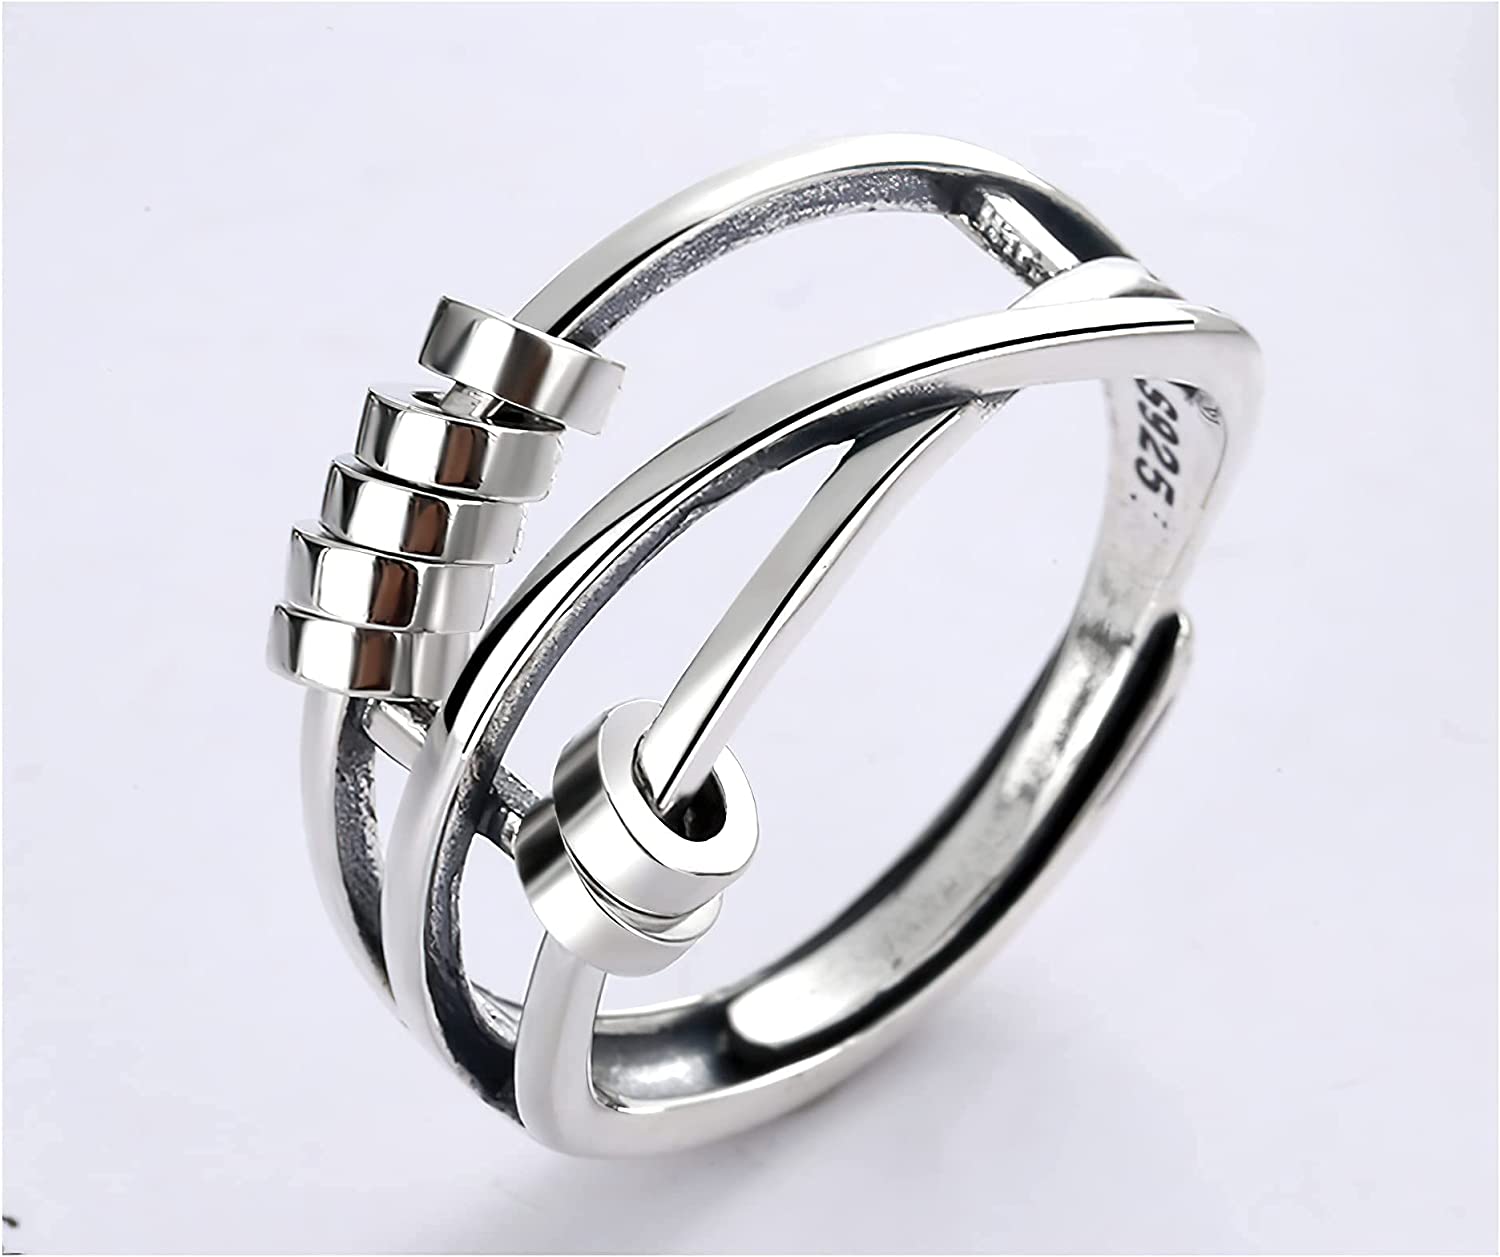 SEAMOSH Silver Anti Anxiety Rings For Women Men Fidget Spinner Band Unisex Adjustable Stacking Spinning Worry Ring